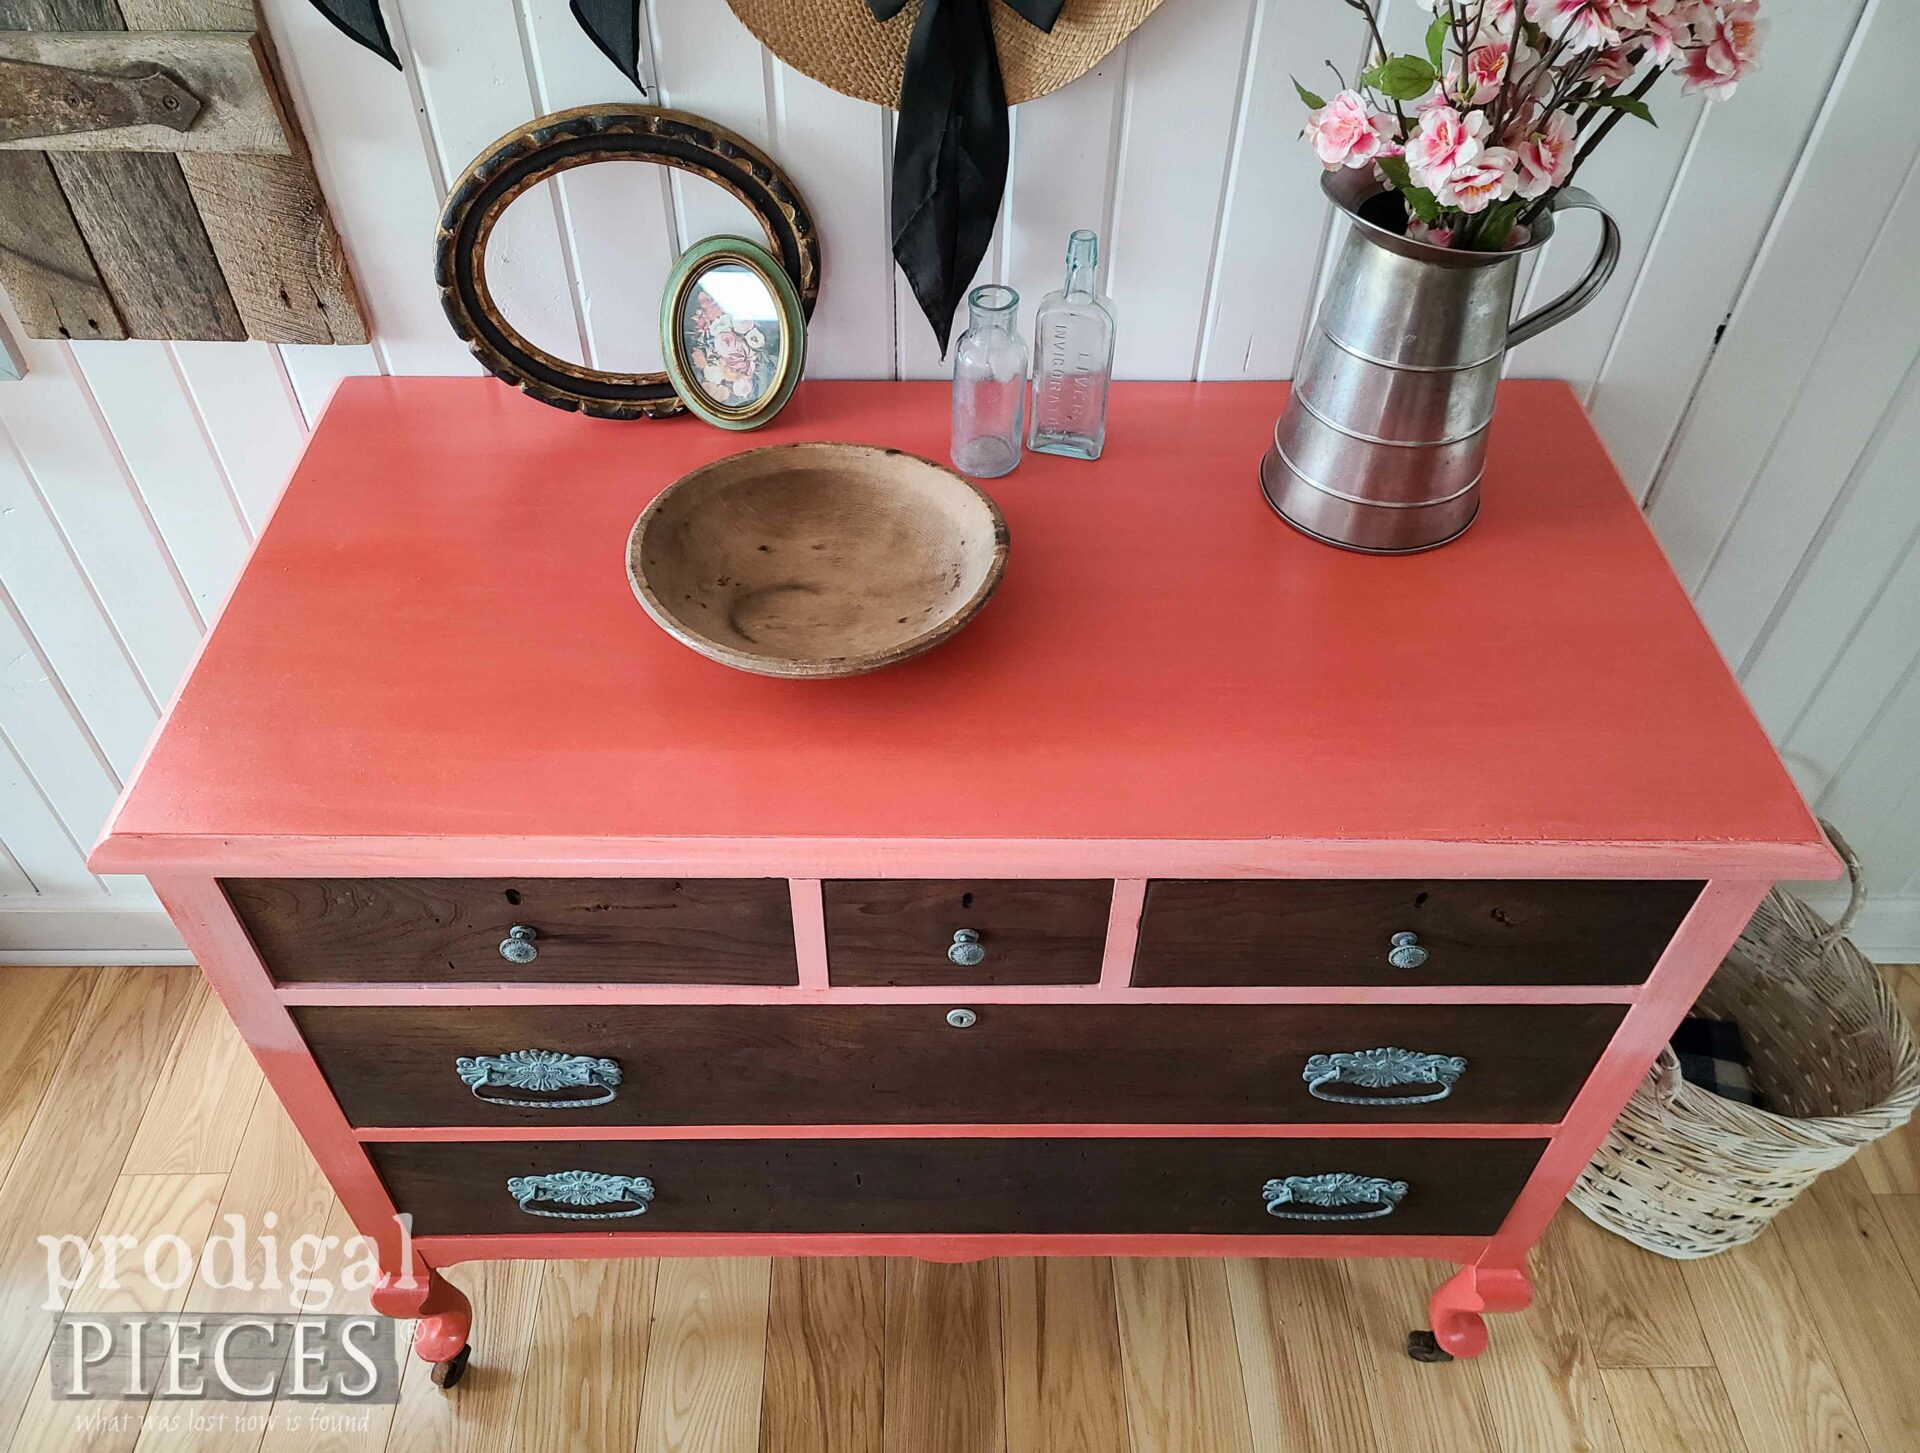 Top View Ombre Dresser in Coral Pink | prodigalpieces.com #prodigalpieces #boho #diy